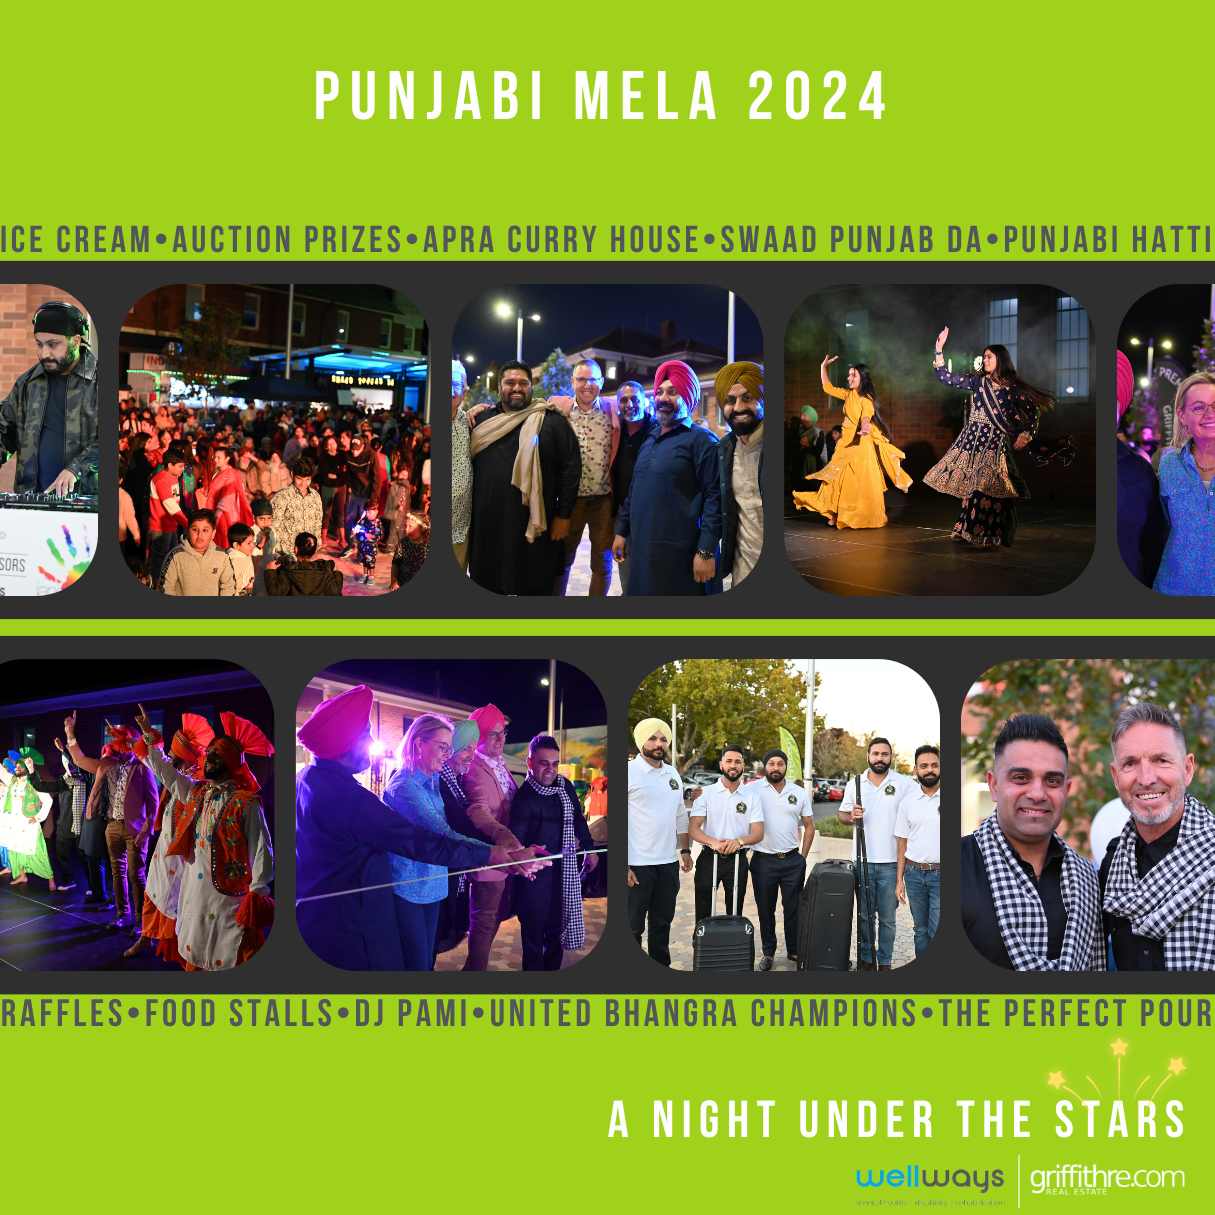 Were you at the Punjabi Mela 2024? Check out the pictures here!